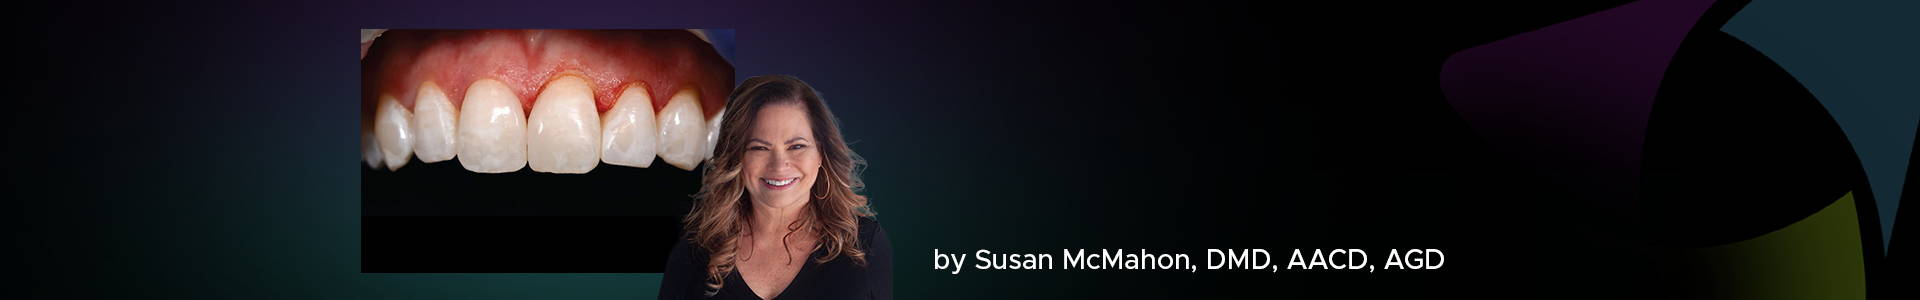 blog banner featuring Dr Susan McMahon and a clinical image behind